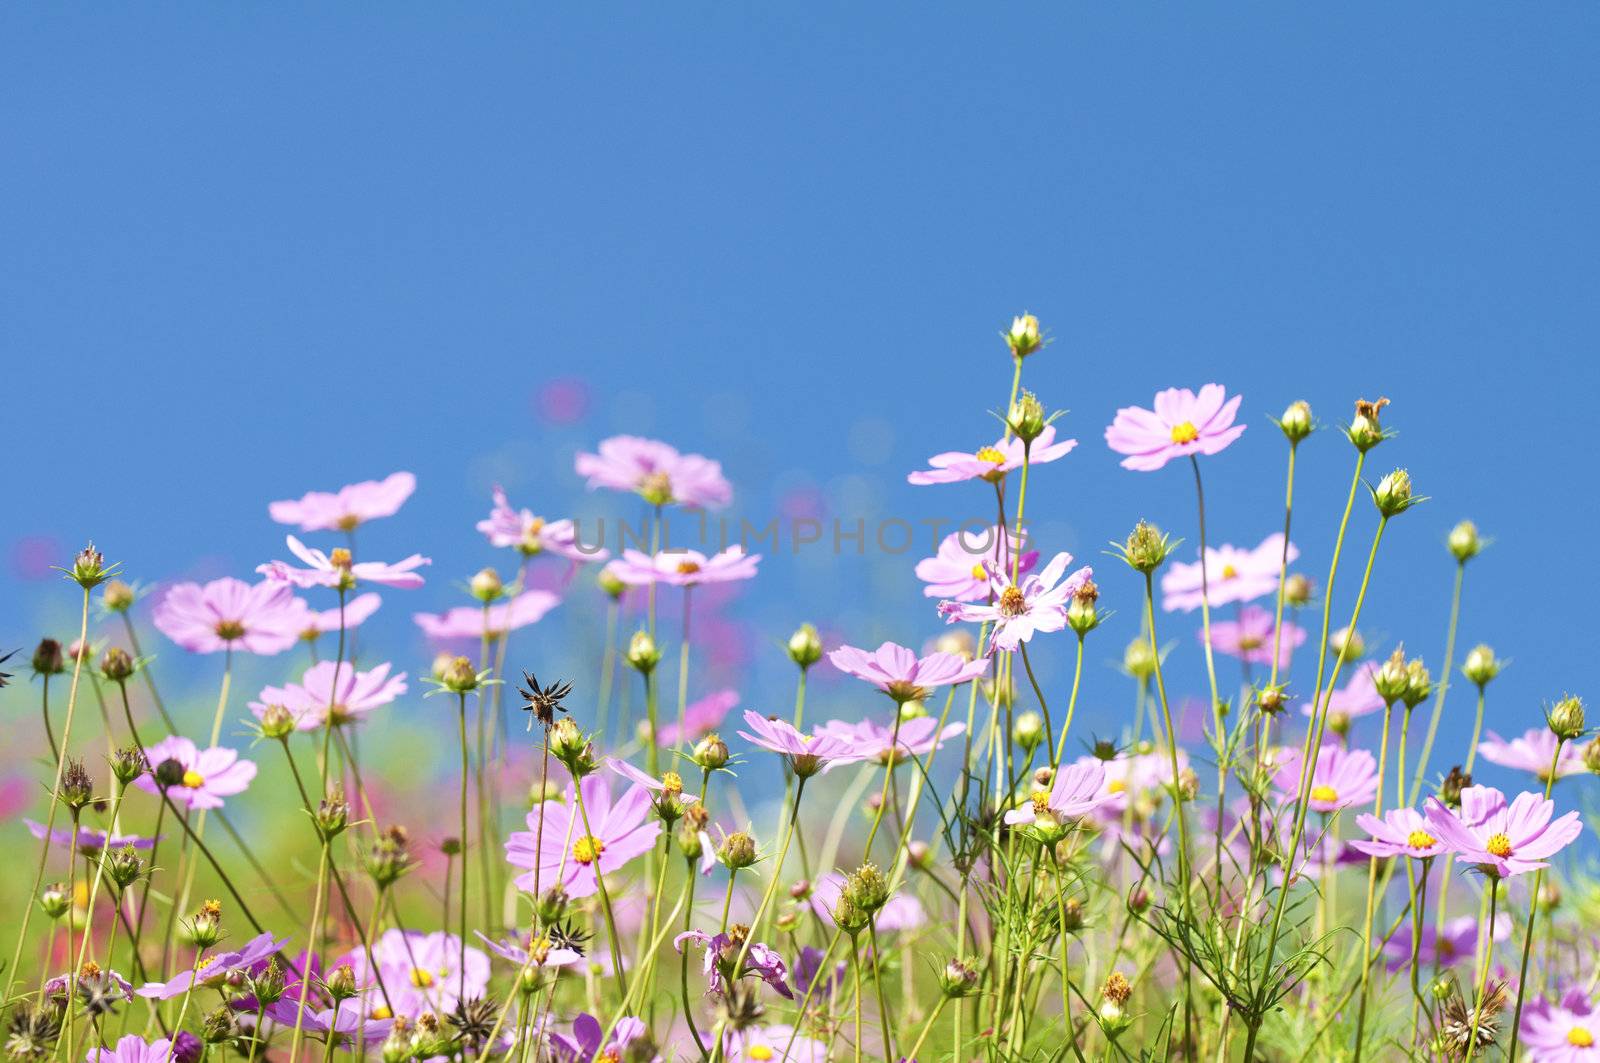 Bunch of spring flowers in the meadow by yuliang11